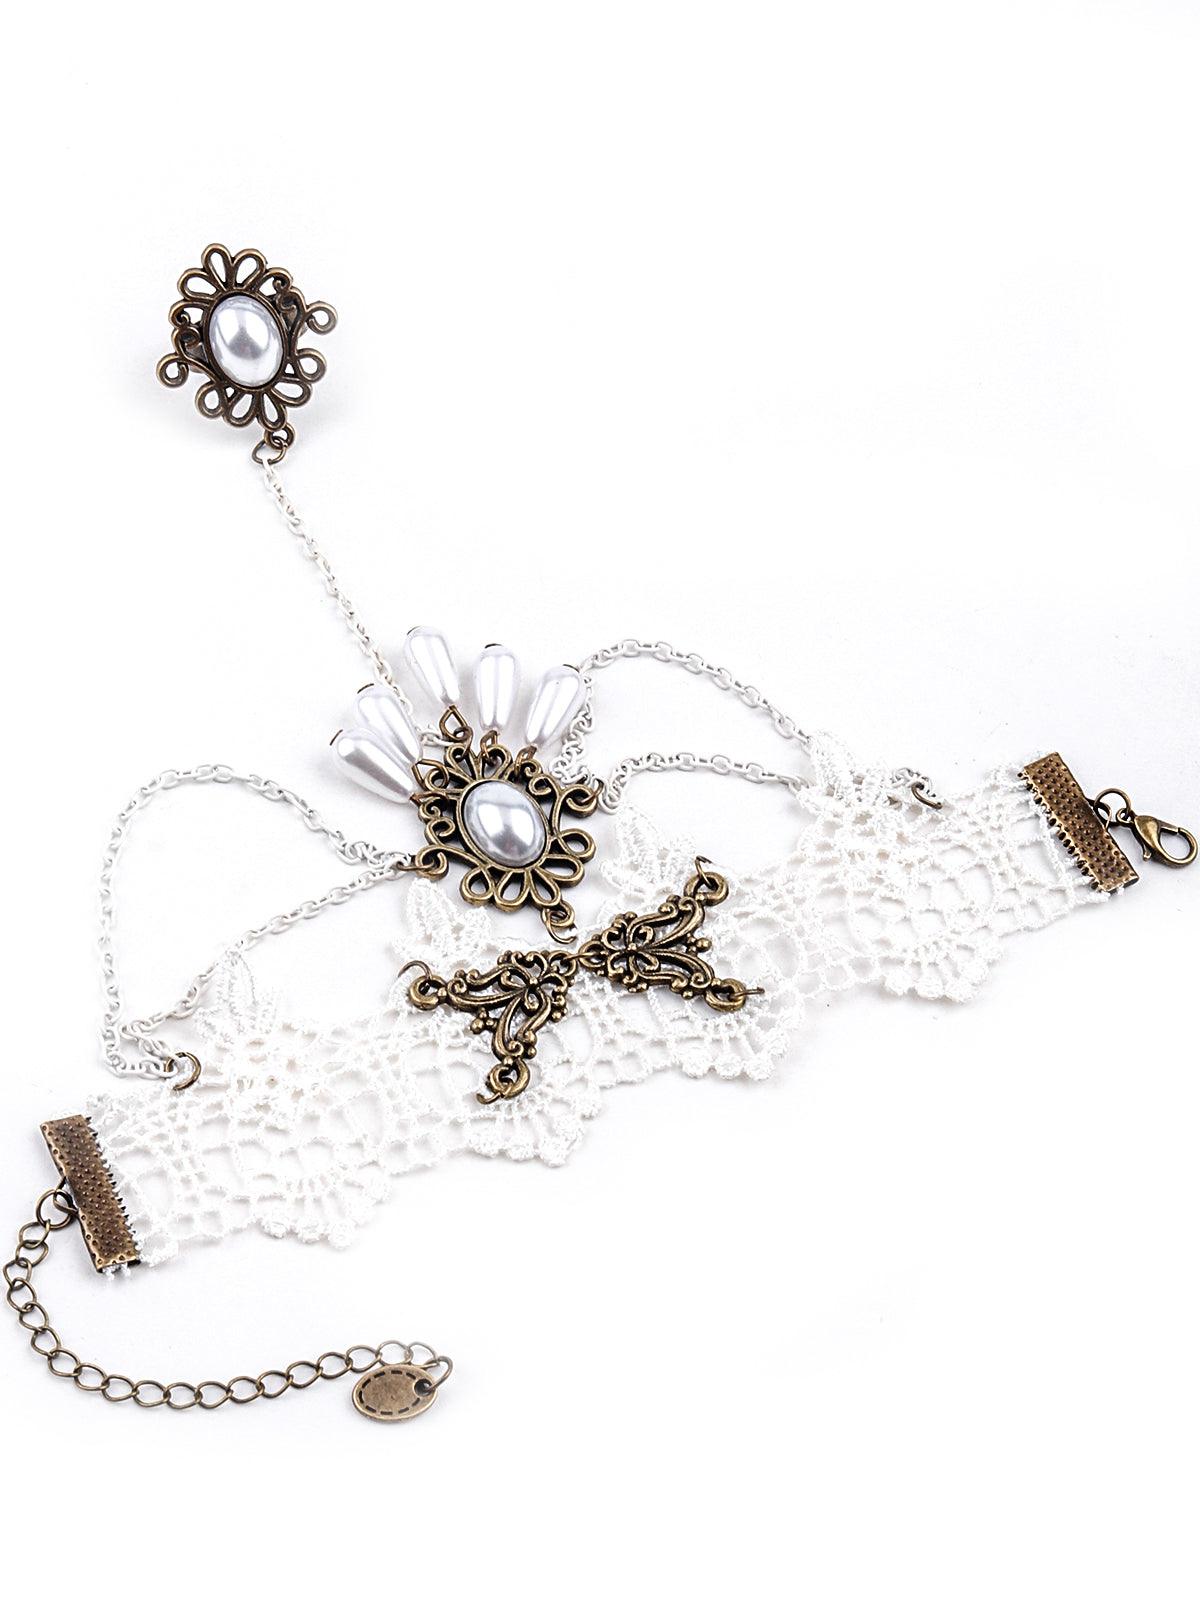 Women's White Lace Bracelet Secured With A Ring Chain - Odette